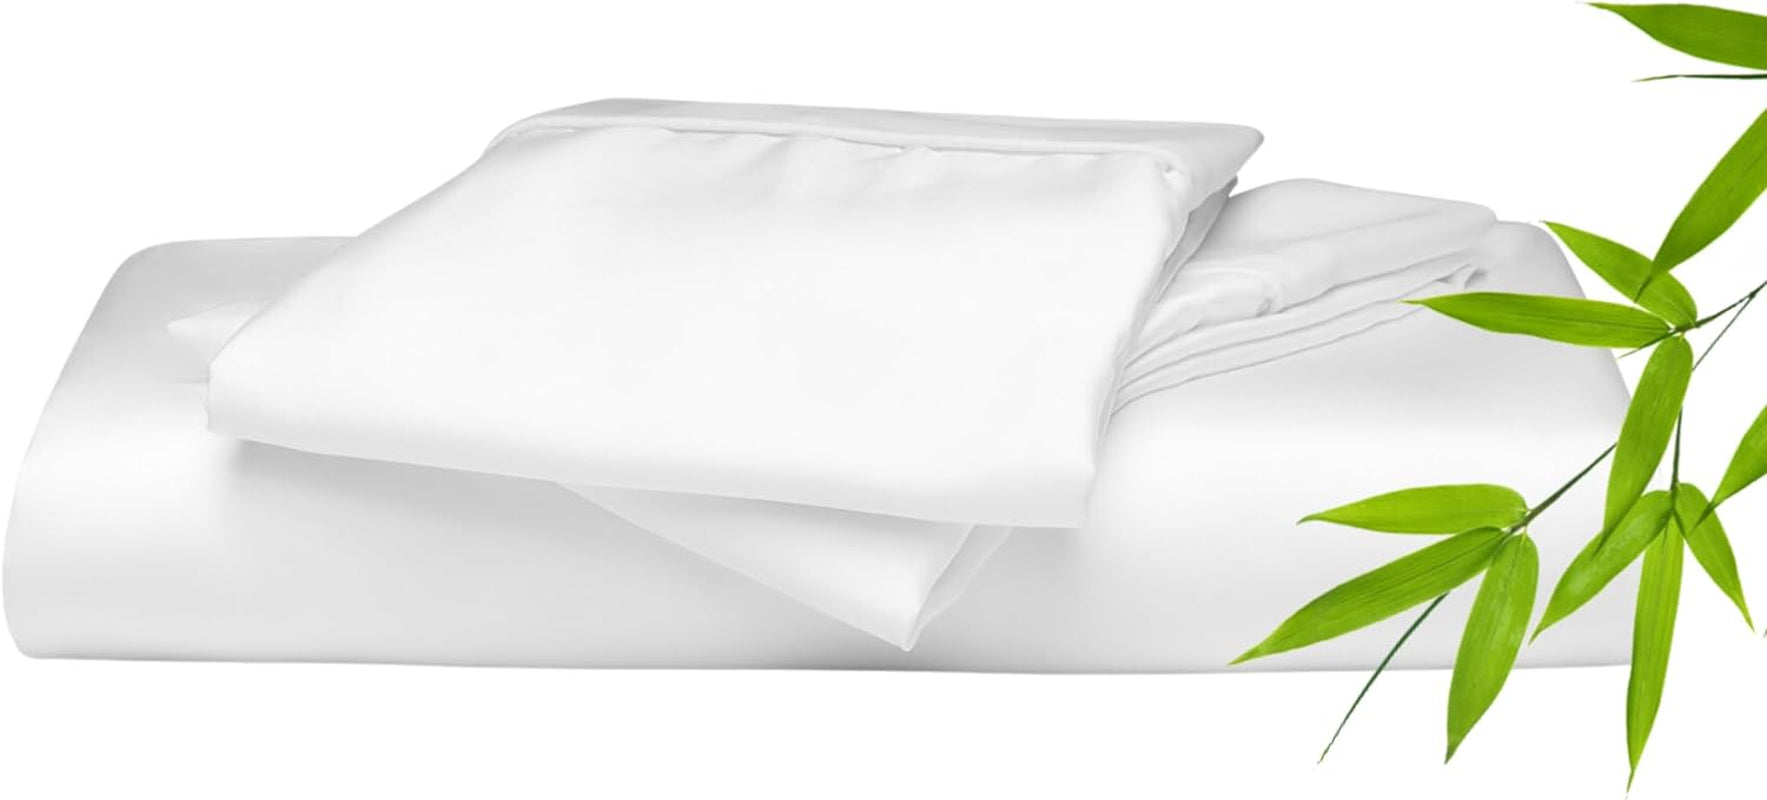 Basic Sheet Set, Cloud (White), King - Breathable Sheets, Bamboo Bedding, Sustainable, Sateen, Plant-Based Fabric, Silky-Soft, Deep Pockets, Cleanbamboo